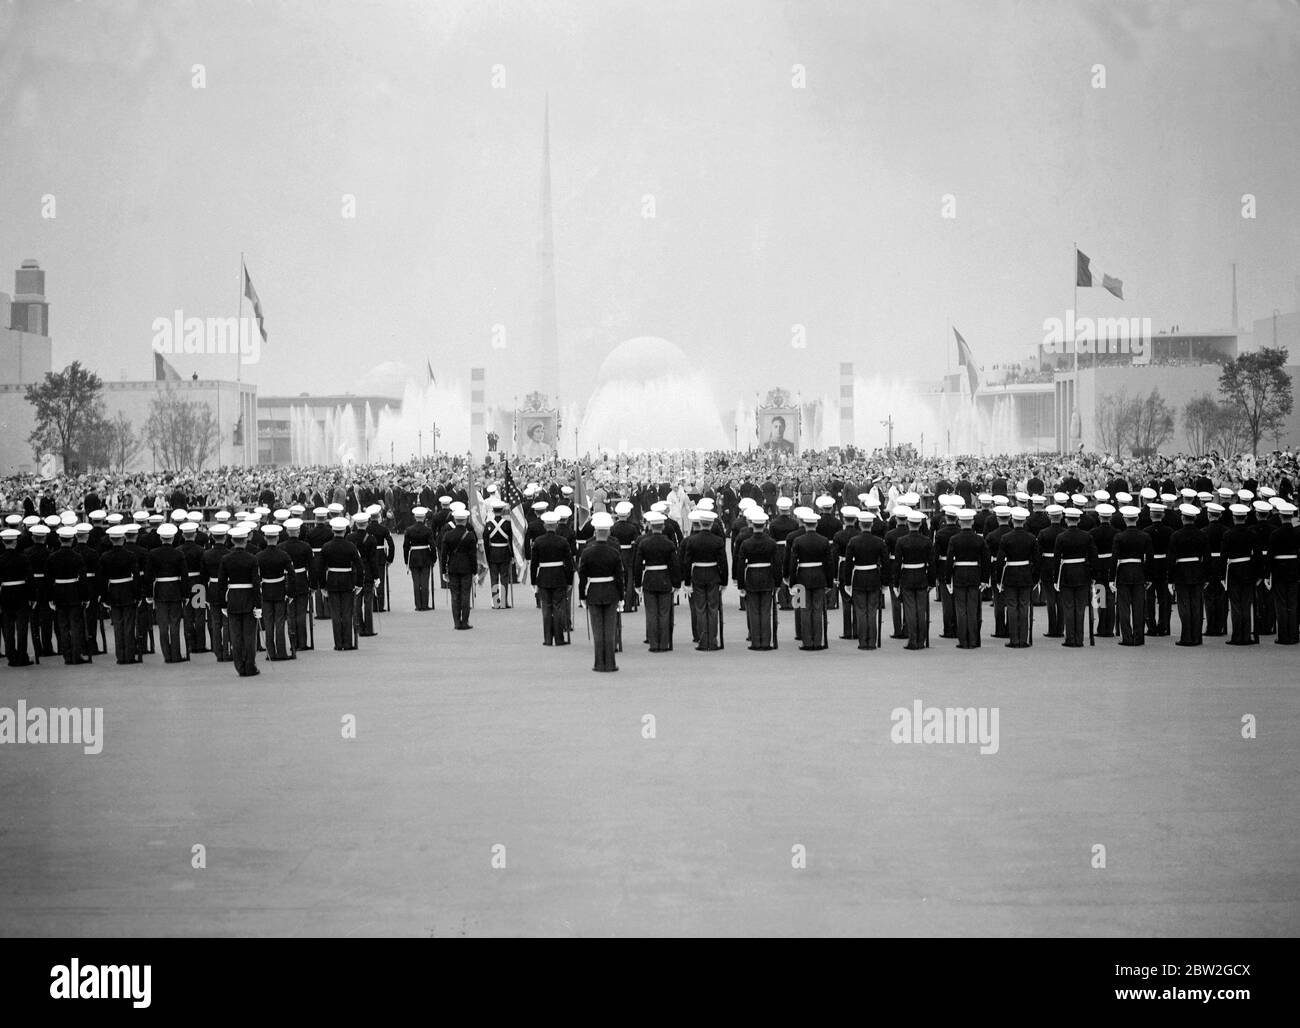 The Royal tour of Canada and the USA by King George VI and Queen Elizabeth , 1939 The welcome for the King and Queen as they arrive at New York World ' s Fair. Stock Photo